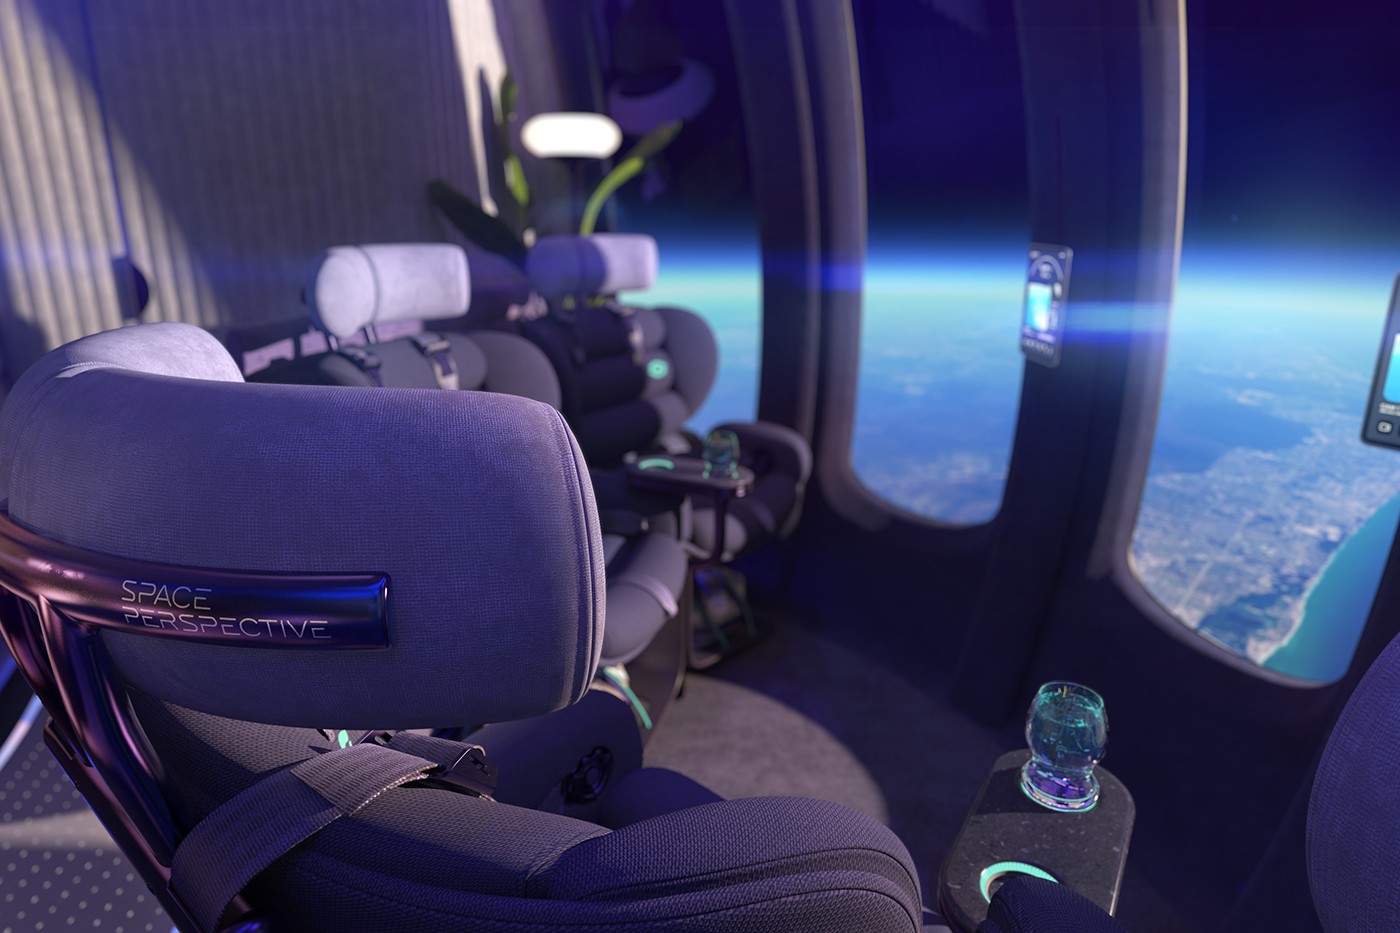 Space Perspective Reveals Design For Luxury Space Vacation Capsule - Maxim